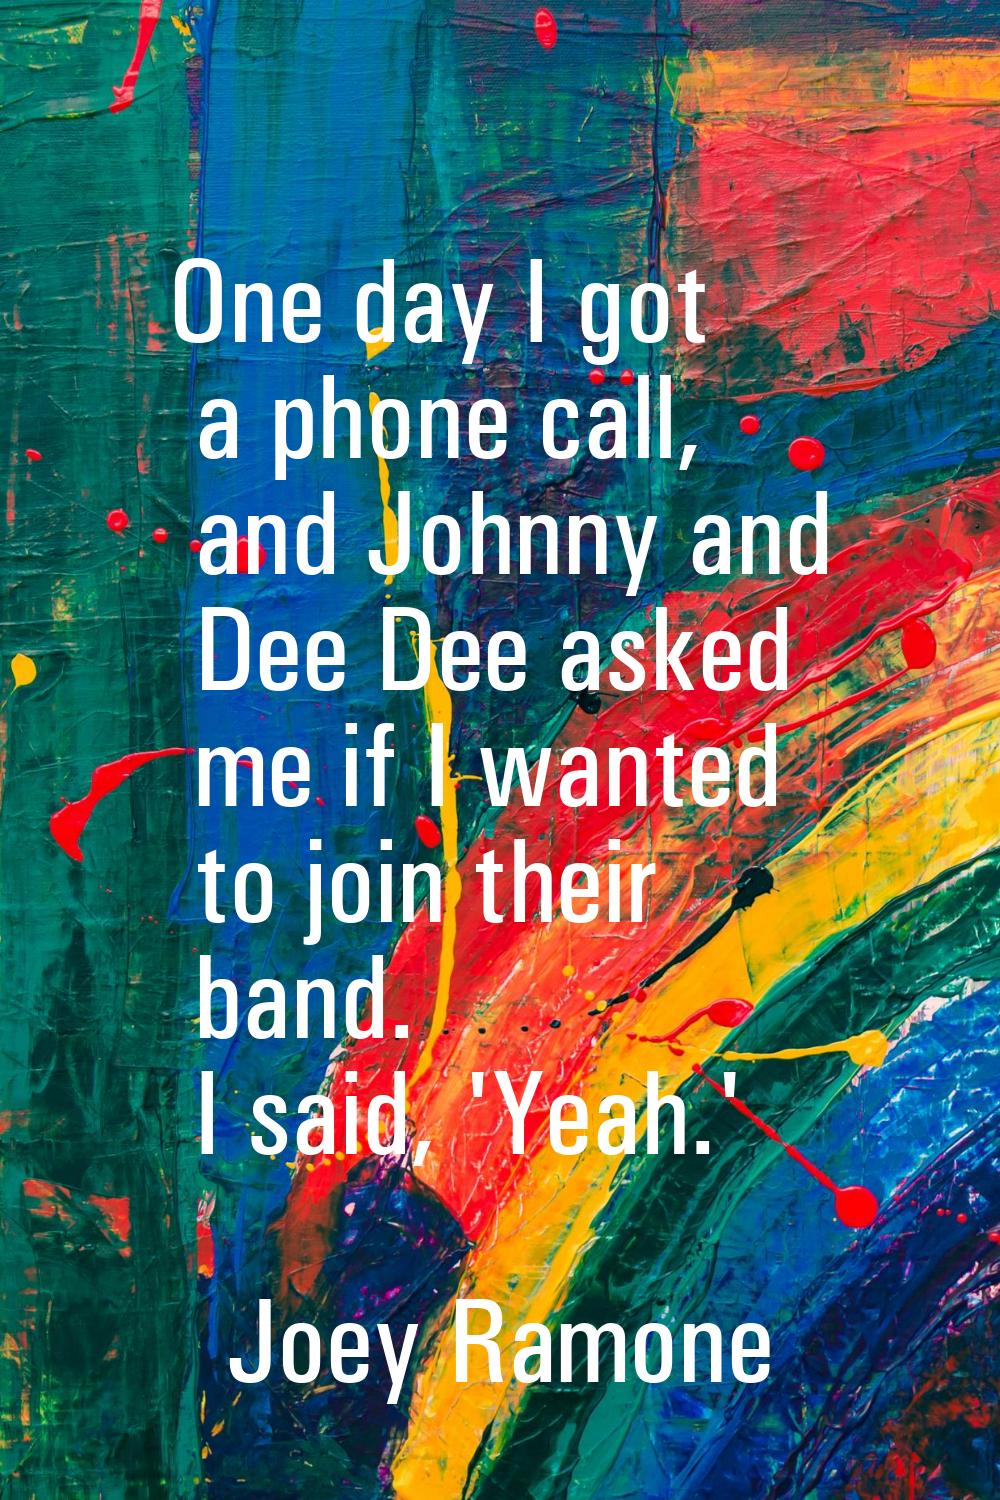 One day I got a phone call, and Johnny and Dee Dee asked me if I wanted to join their band. I said,